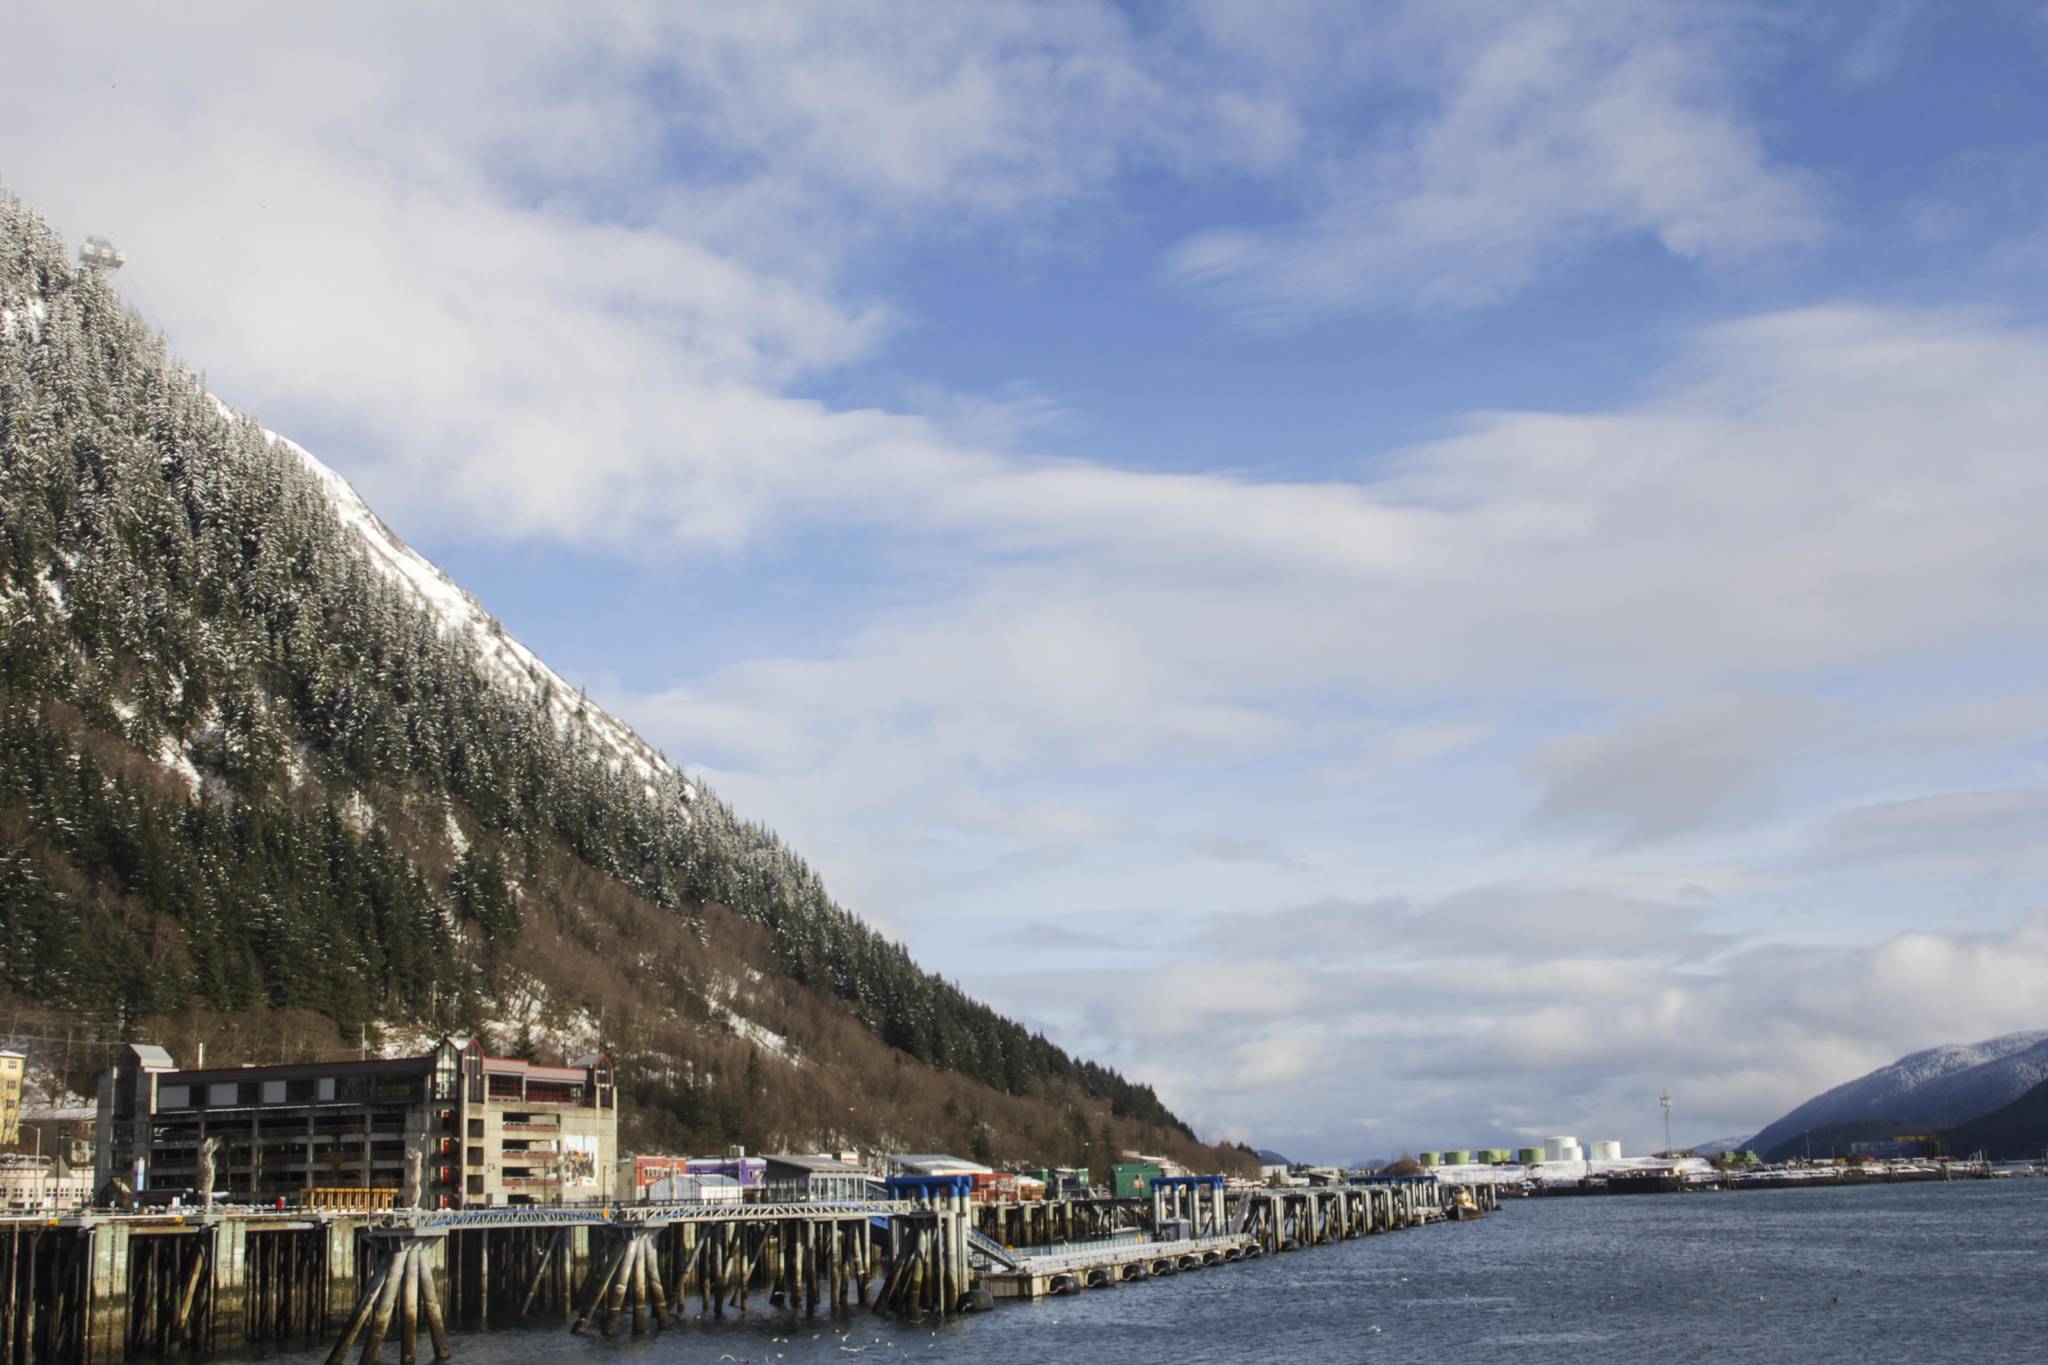 The Department of Environmental Conservation has an ongoing study to measure the effects of air pollution from cruise ship emissions in Juneau, particularly the waterfront area, seen here on March 24, 2021. (Michael S. Lockett / Juneau Empire)